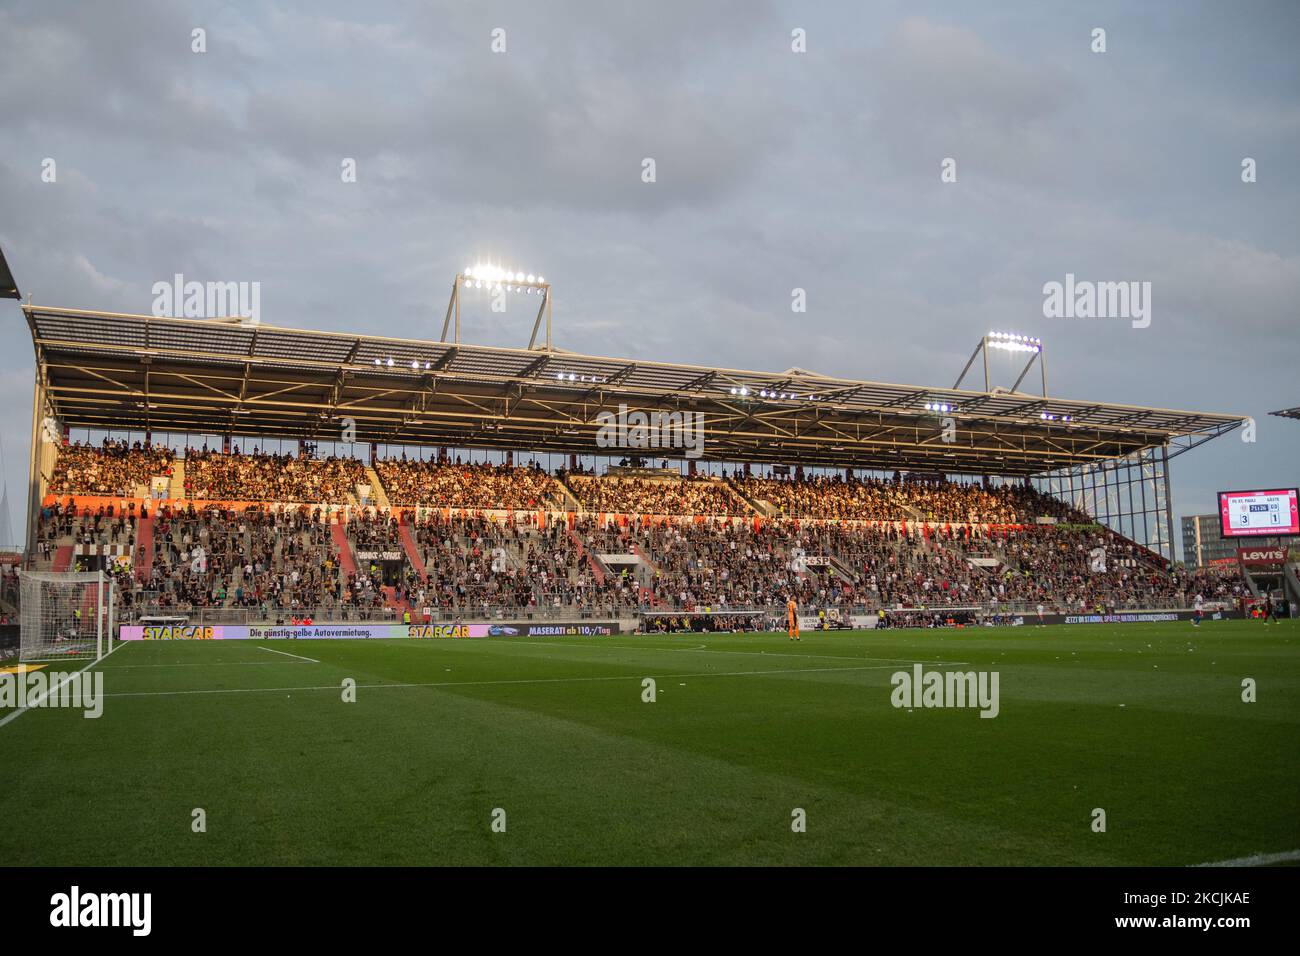 A general view inside the stadium during the Second Bundesliga match between FC St. Pauli and Hamburger SV at Millerntor-Stadium on August 13, 2021 in Hamburg, Germany. (Photo by Peter Niedung/NurPhoto) Stock Photo